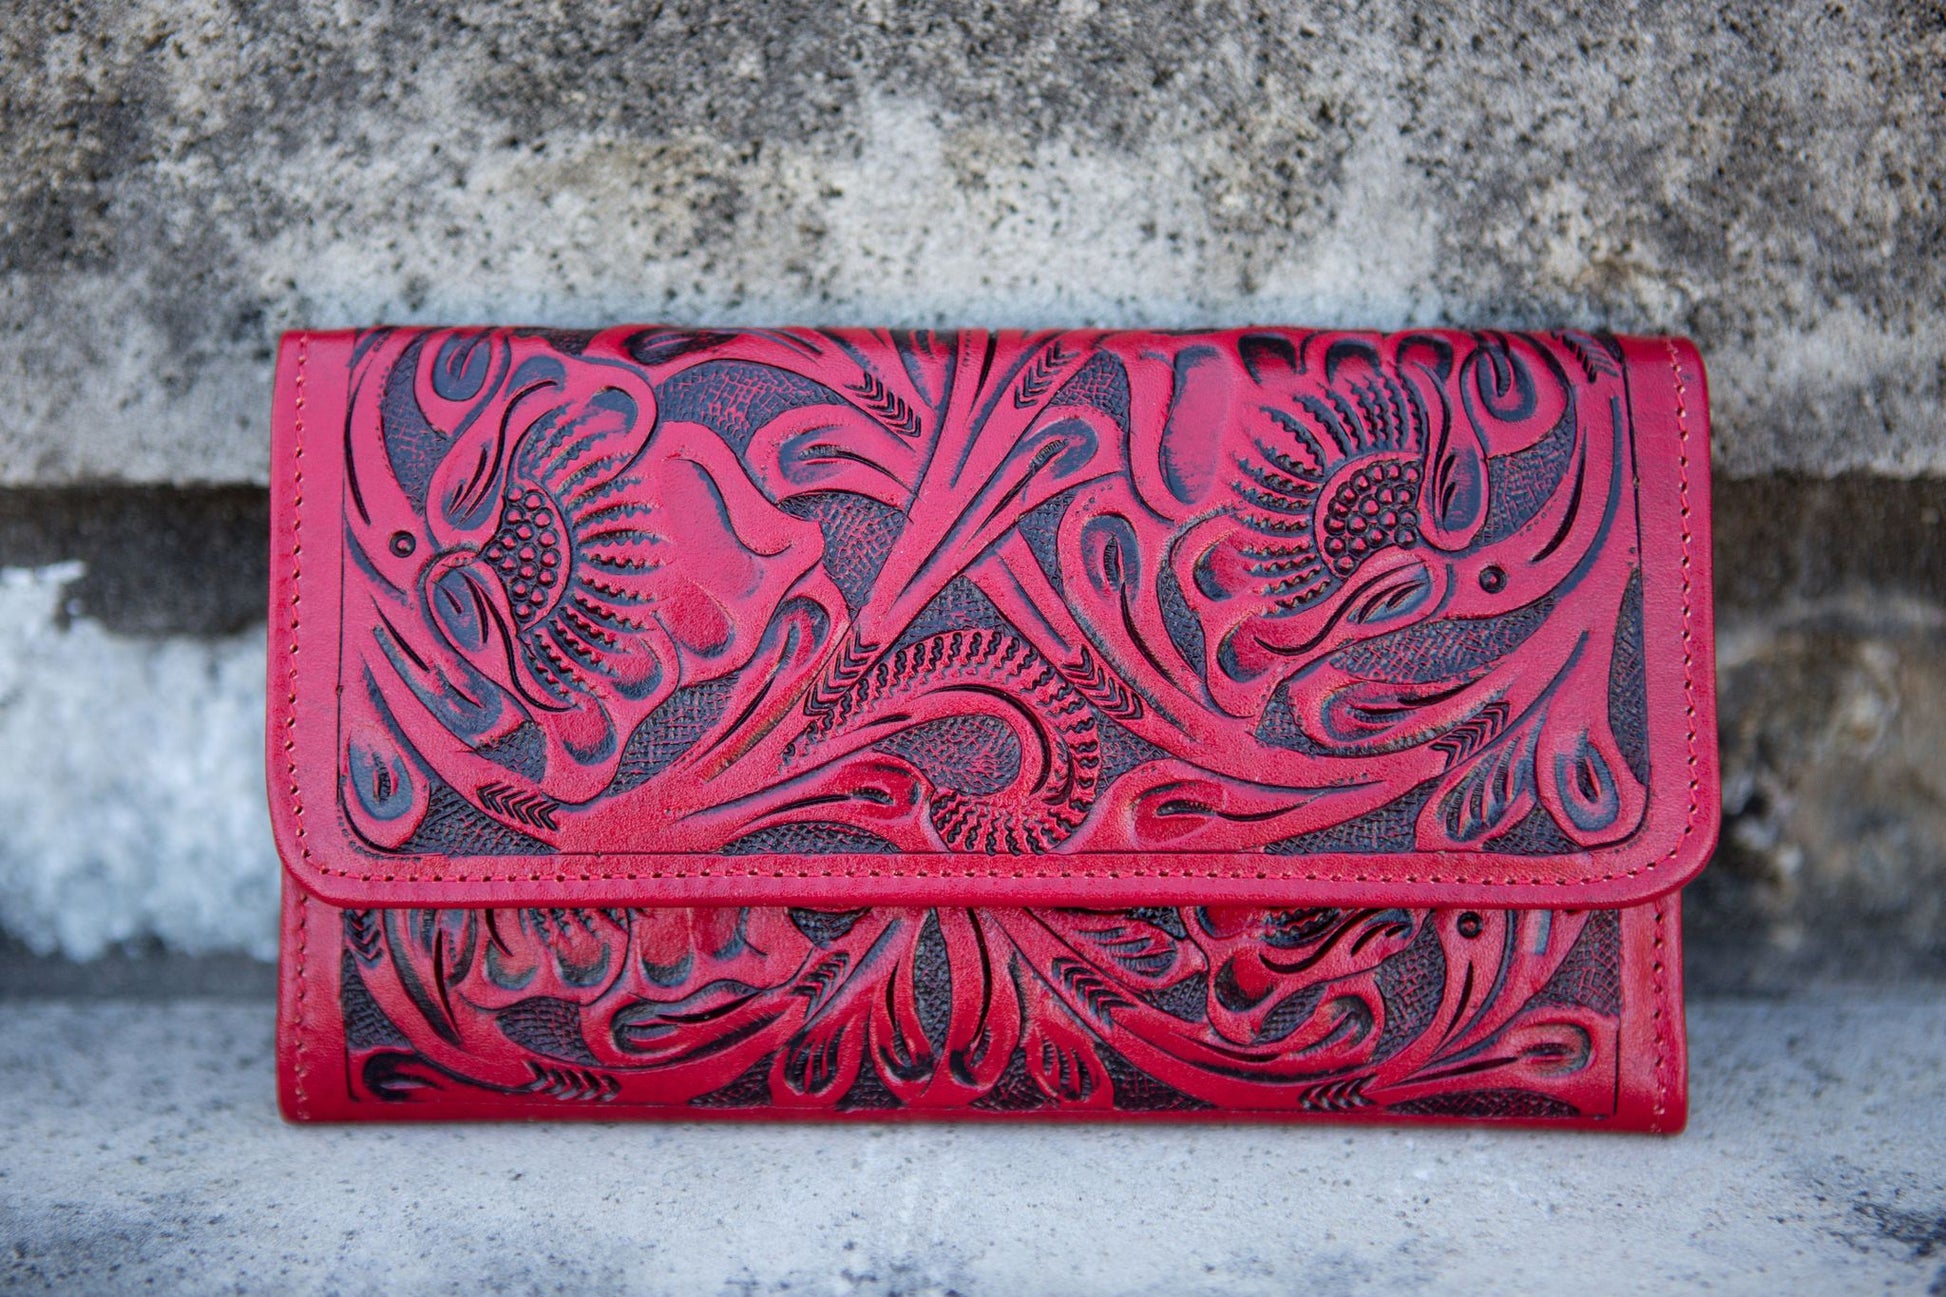 Trifold Floral Tooled Leather Wallet - clutch, cowgirl, gift, leather, purse, southwestern, tooled, turquoise, wallet, western -  - Baha Ranch Western Wear